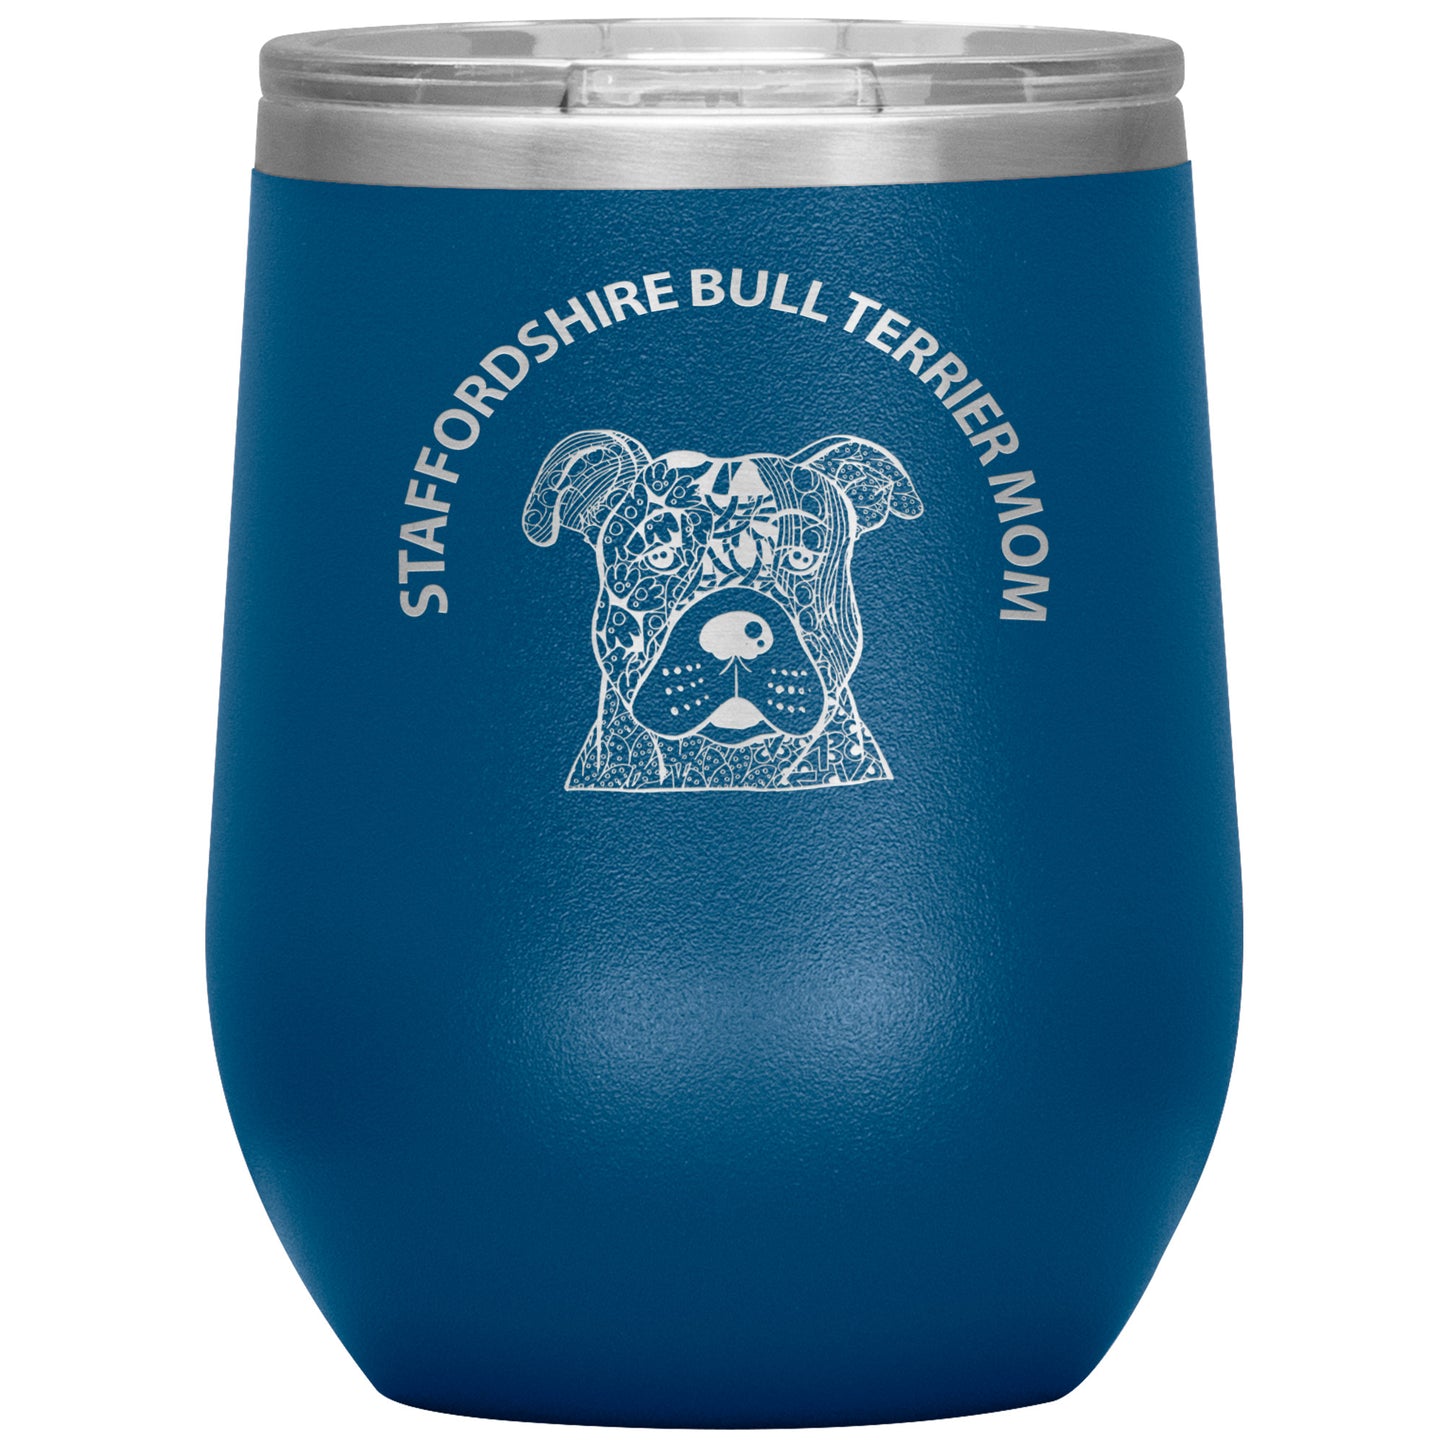 Staffordshire Bull Terrier (Staffie) Mom Design 12oz Insulated Stemless Wine Tumbler - Cindy Sang B&W